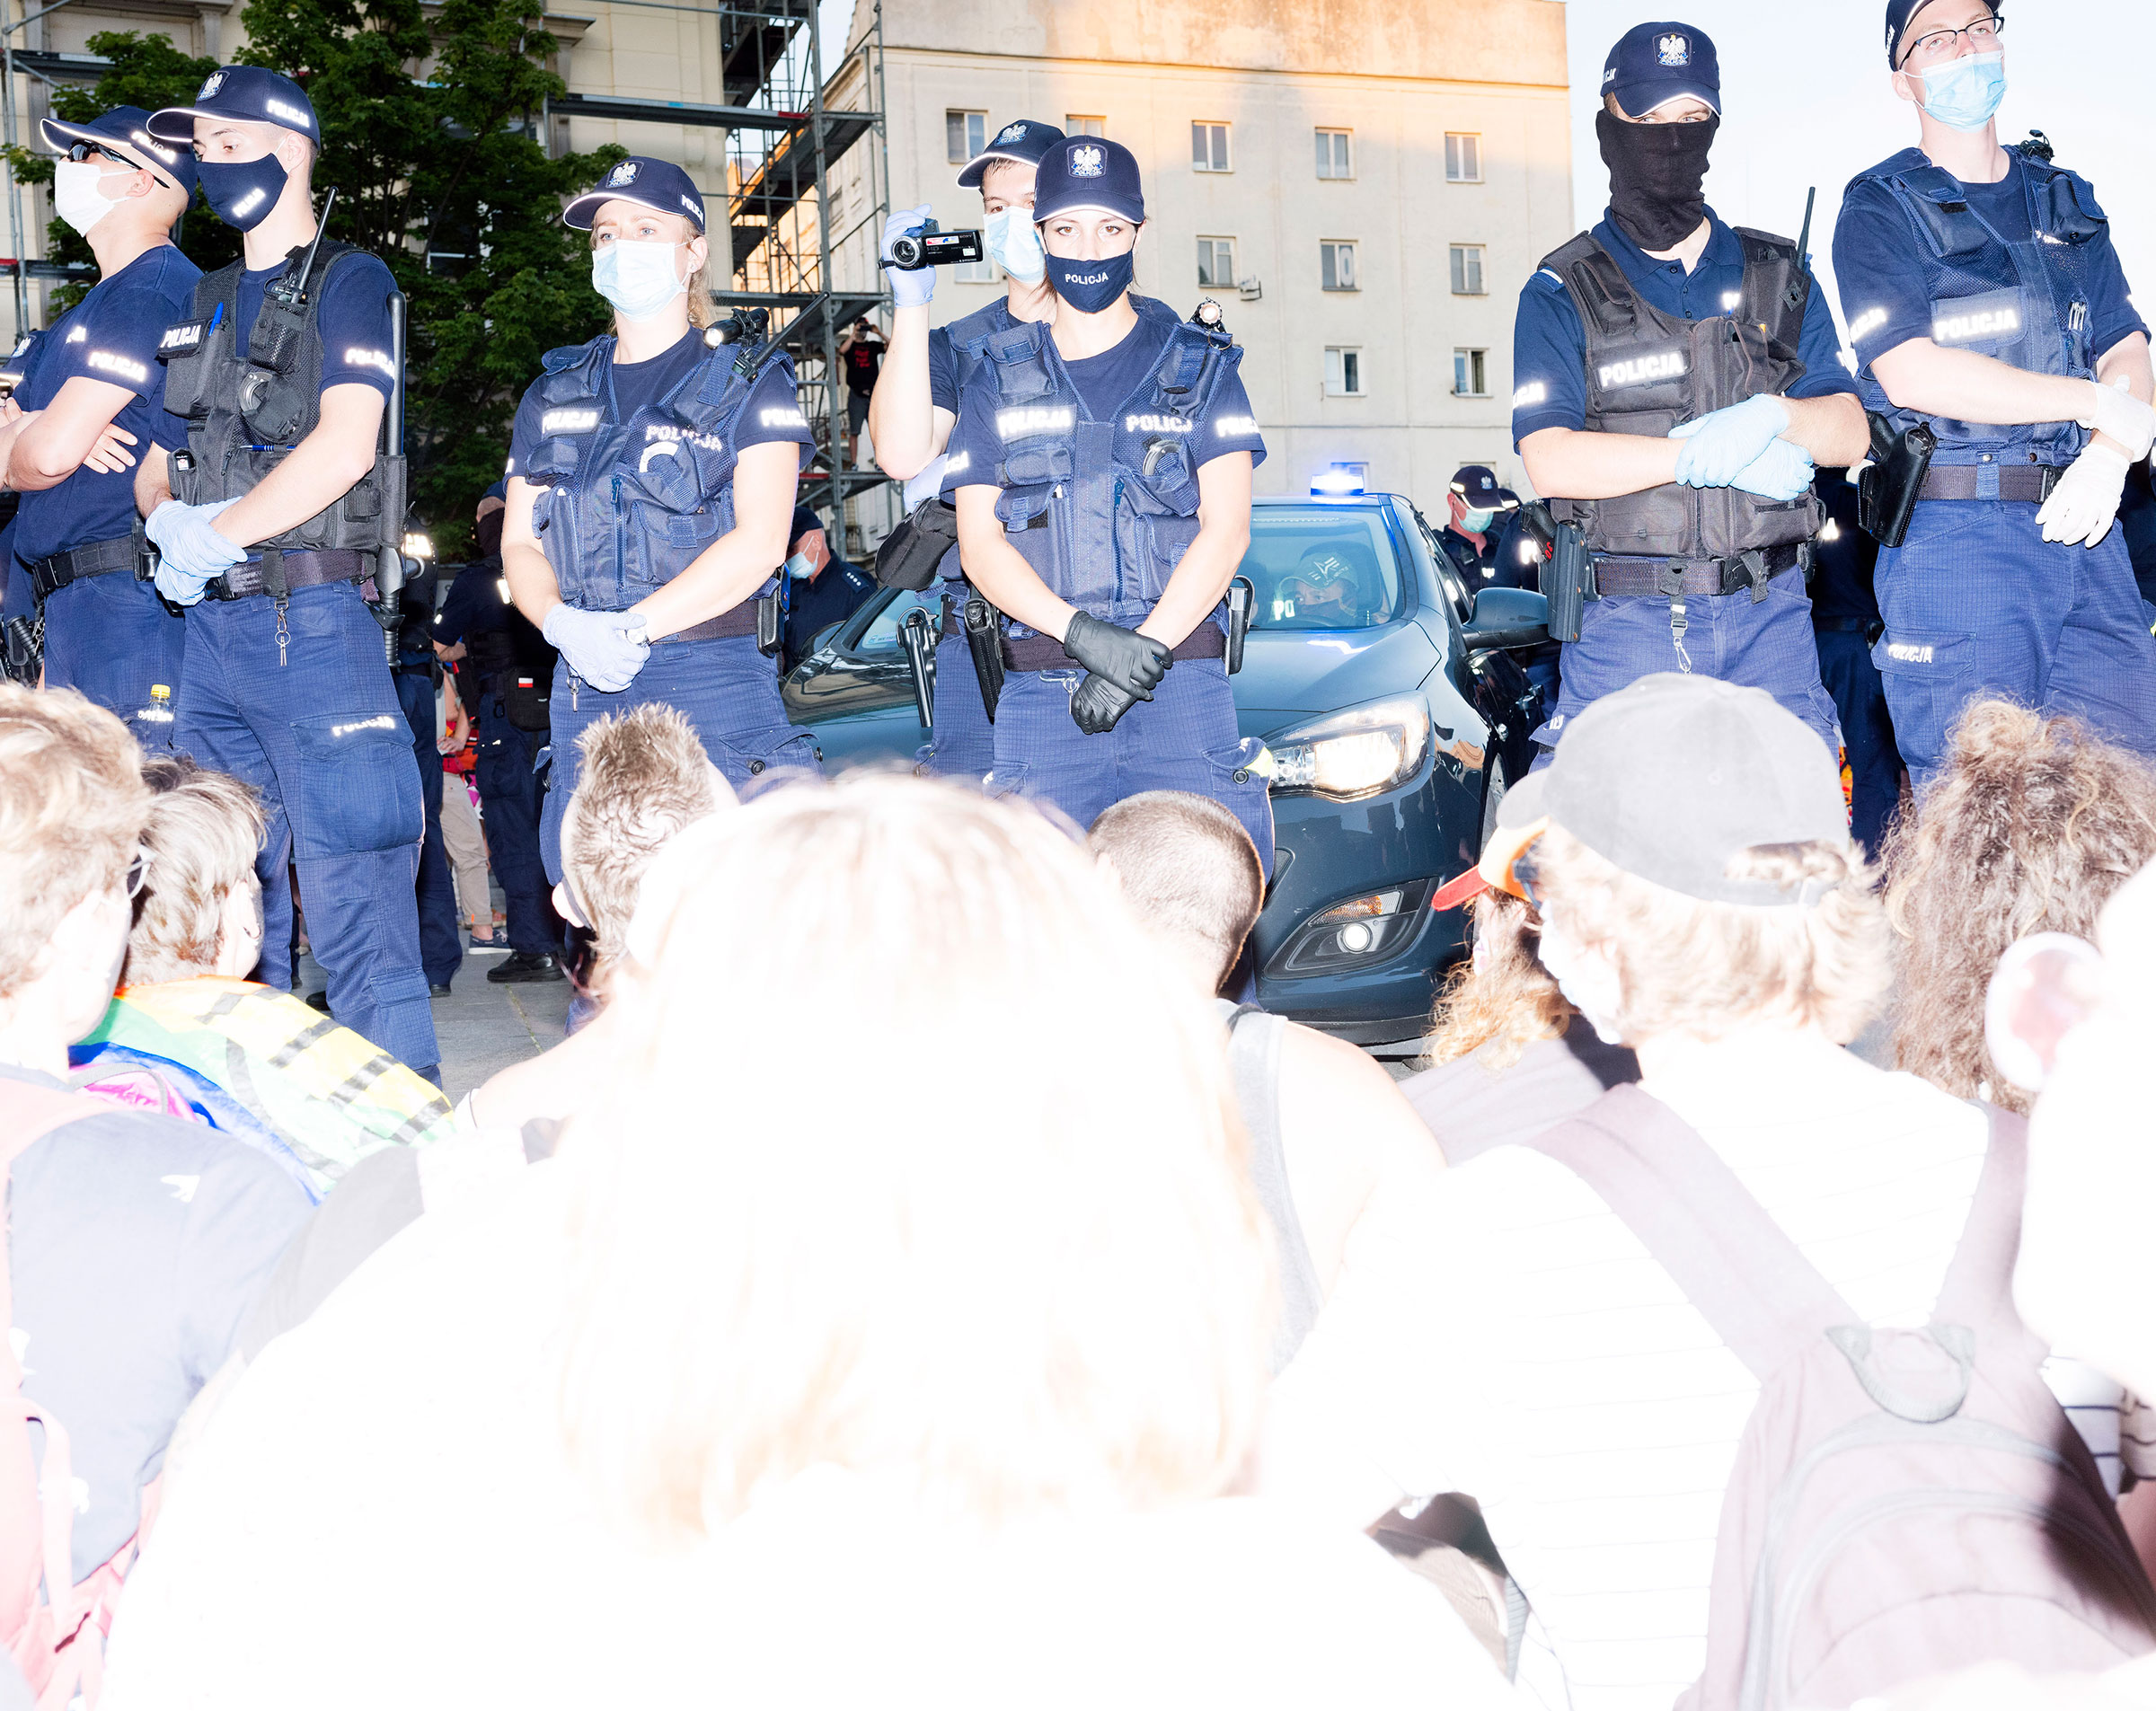 Protestors sit in front of police on in Warsaw, Poland Aug. 7, 2020.